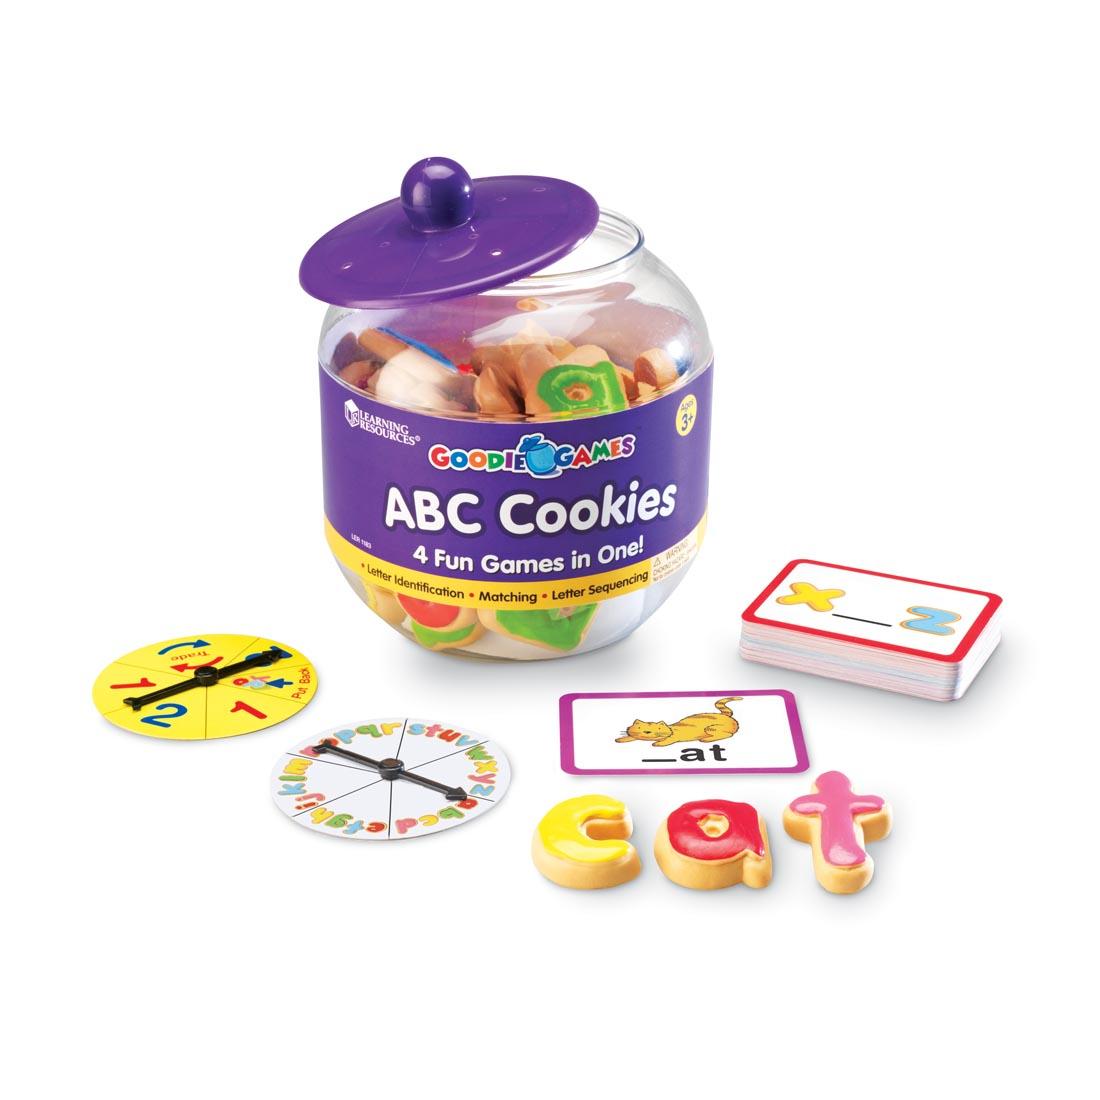 alphabet pieces that look like frosted cookies, plus cards and game spinners from Goodie Games ABC Cookies